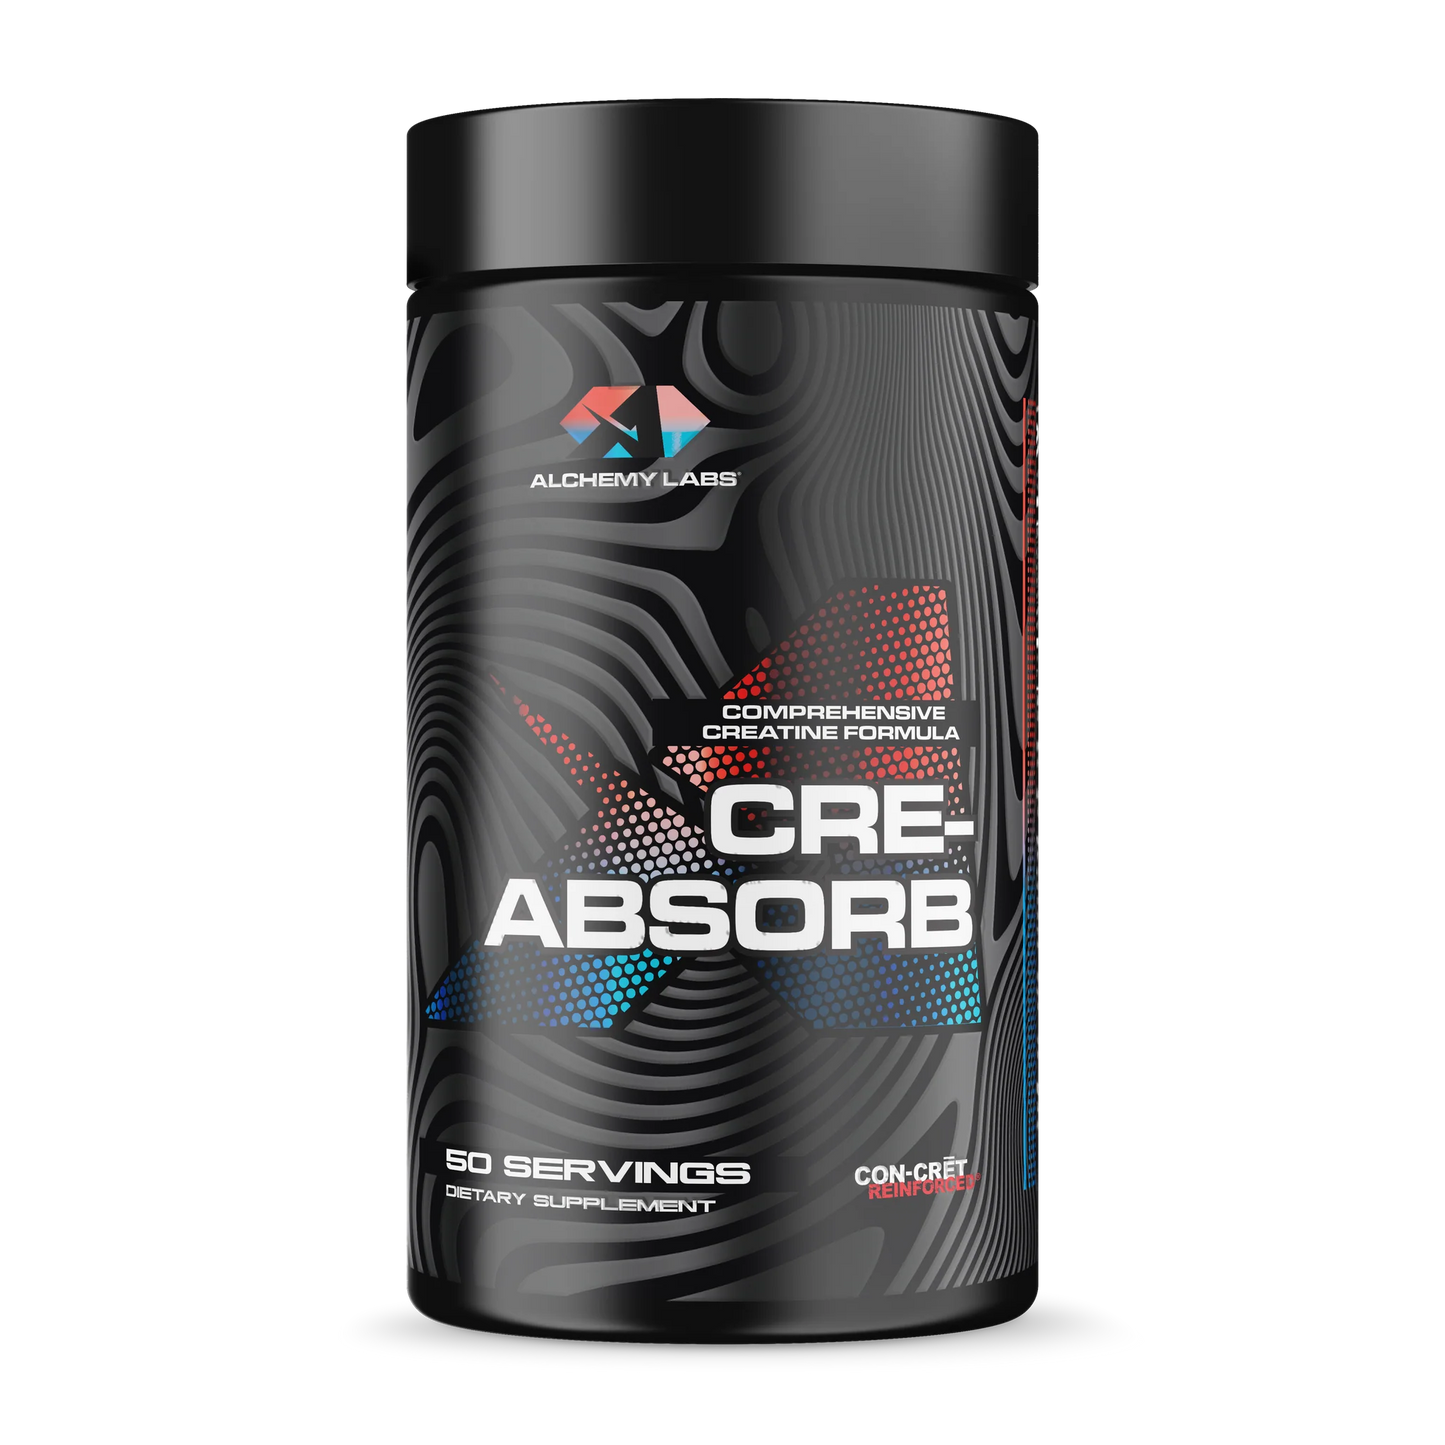 CreAbsorb by Alchemy Labs